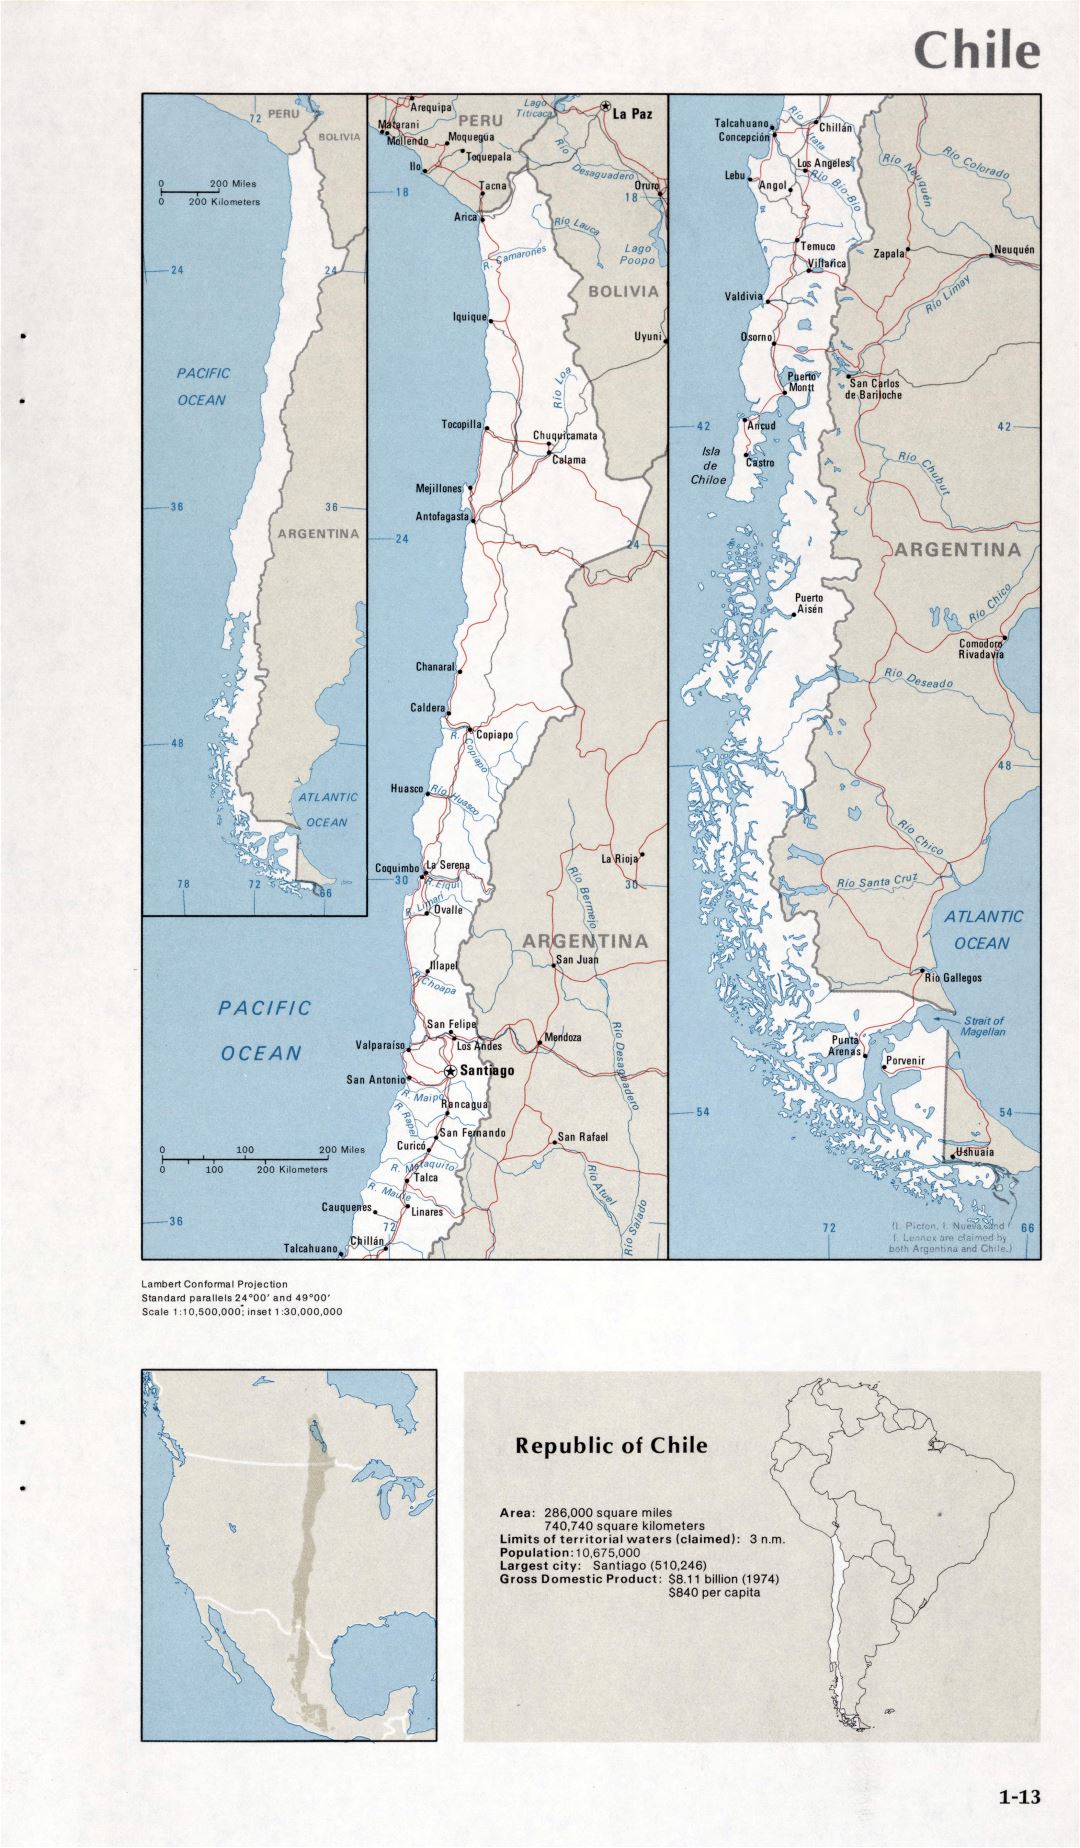 Map of Chile (1-13)